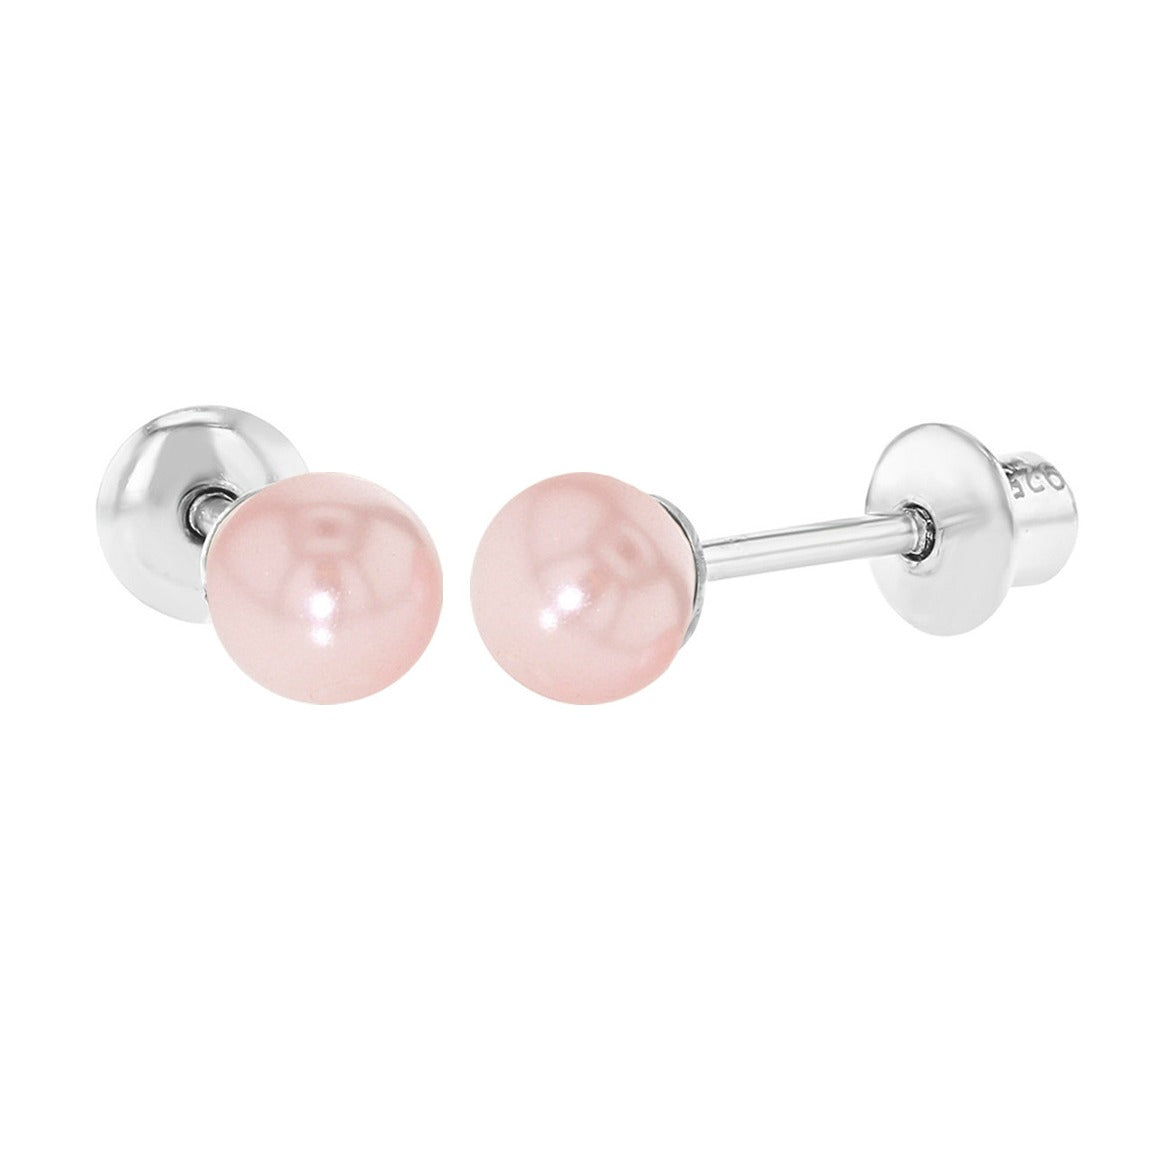 Baby and Children's Earrings:  Sterling Silver, Pale Pinky Pearl Safety Screw Backs 4mm